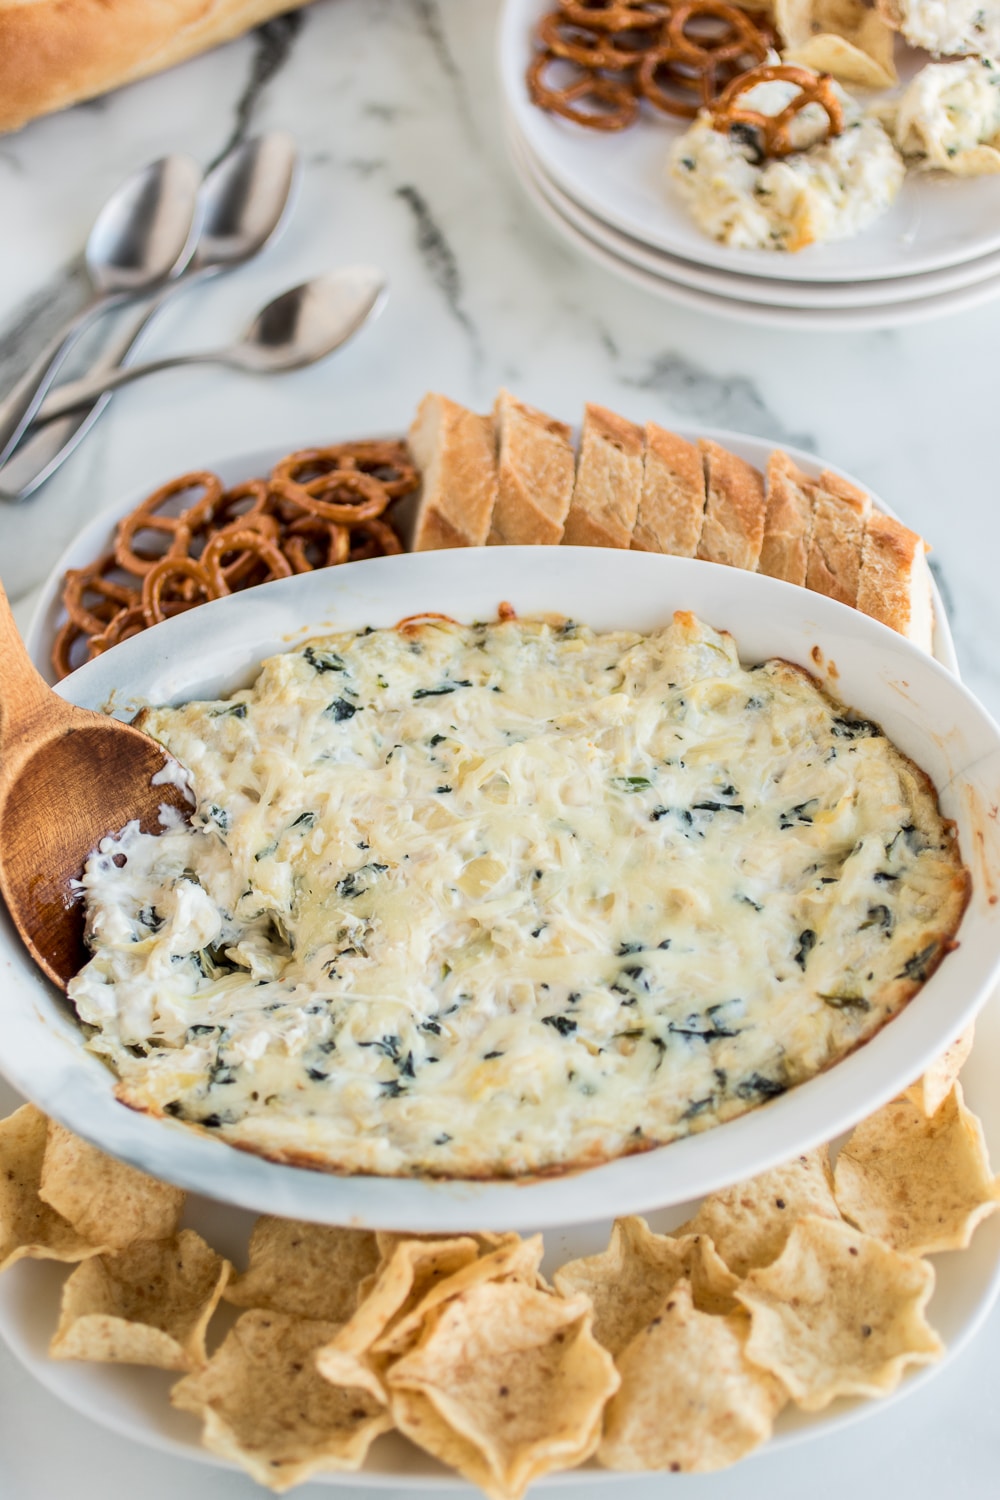 great football party dip